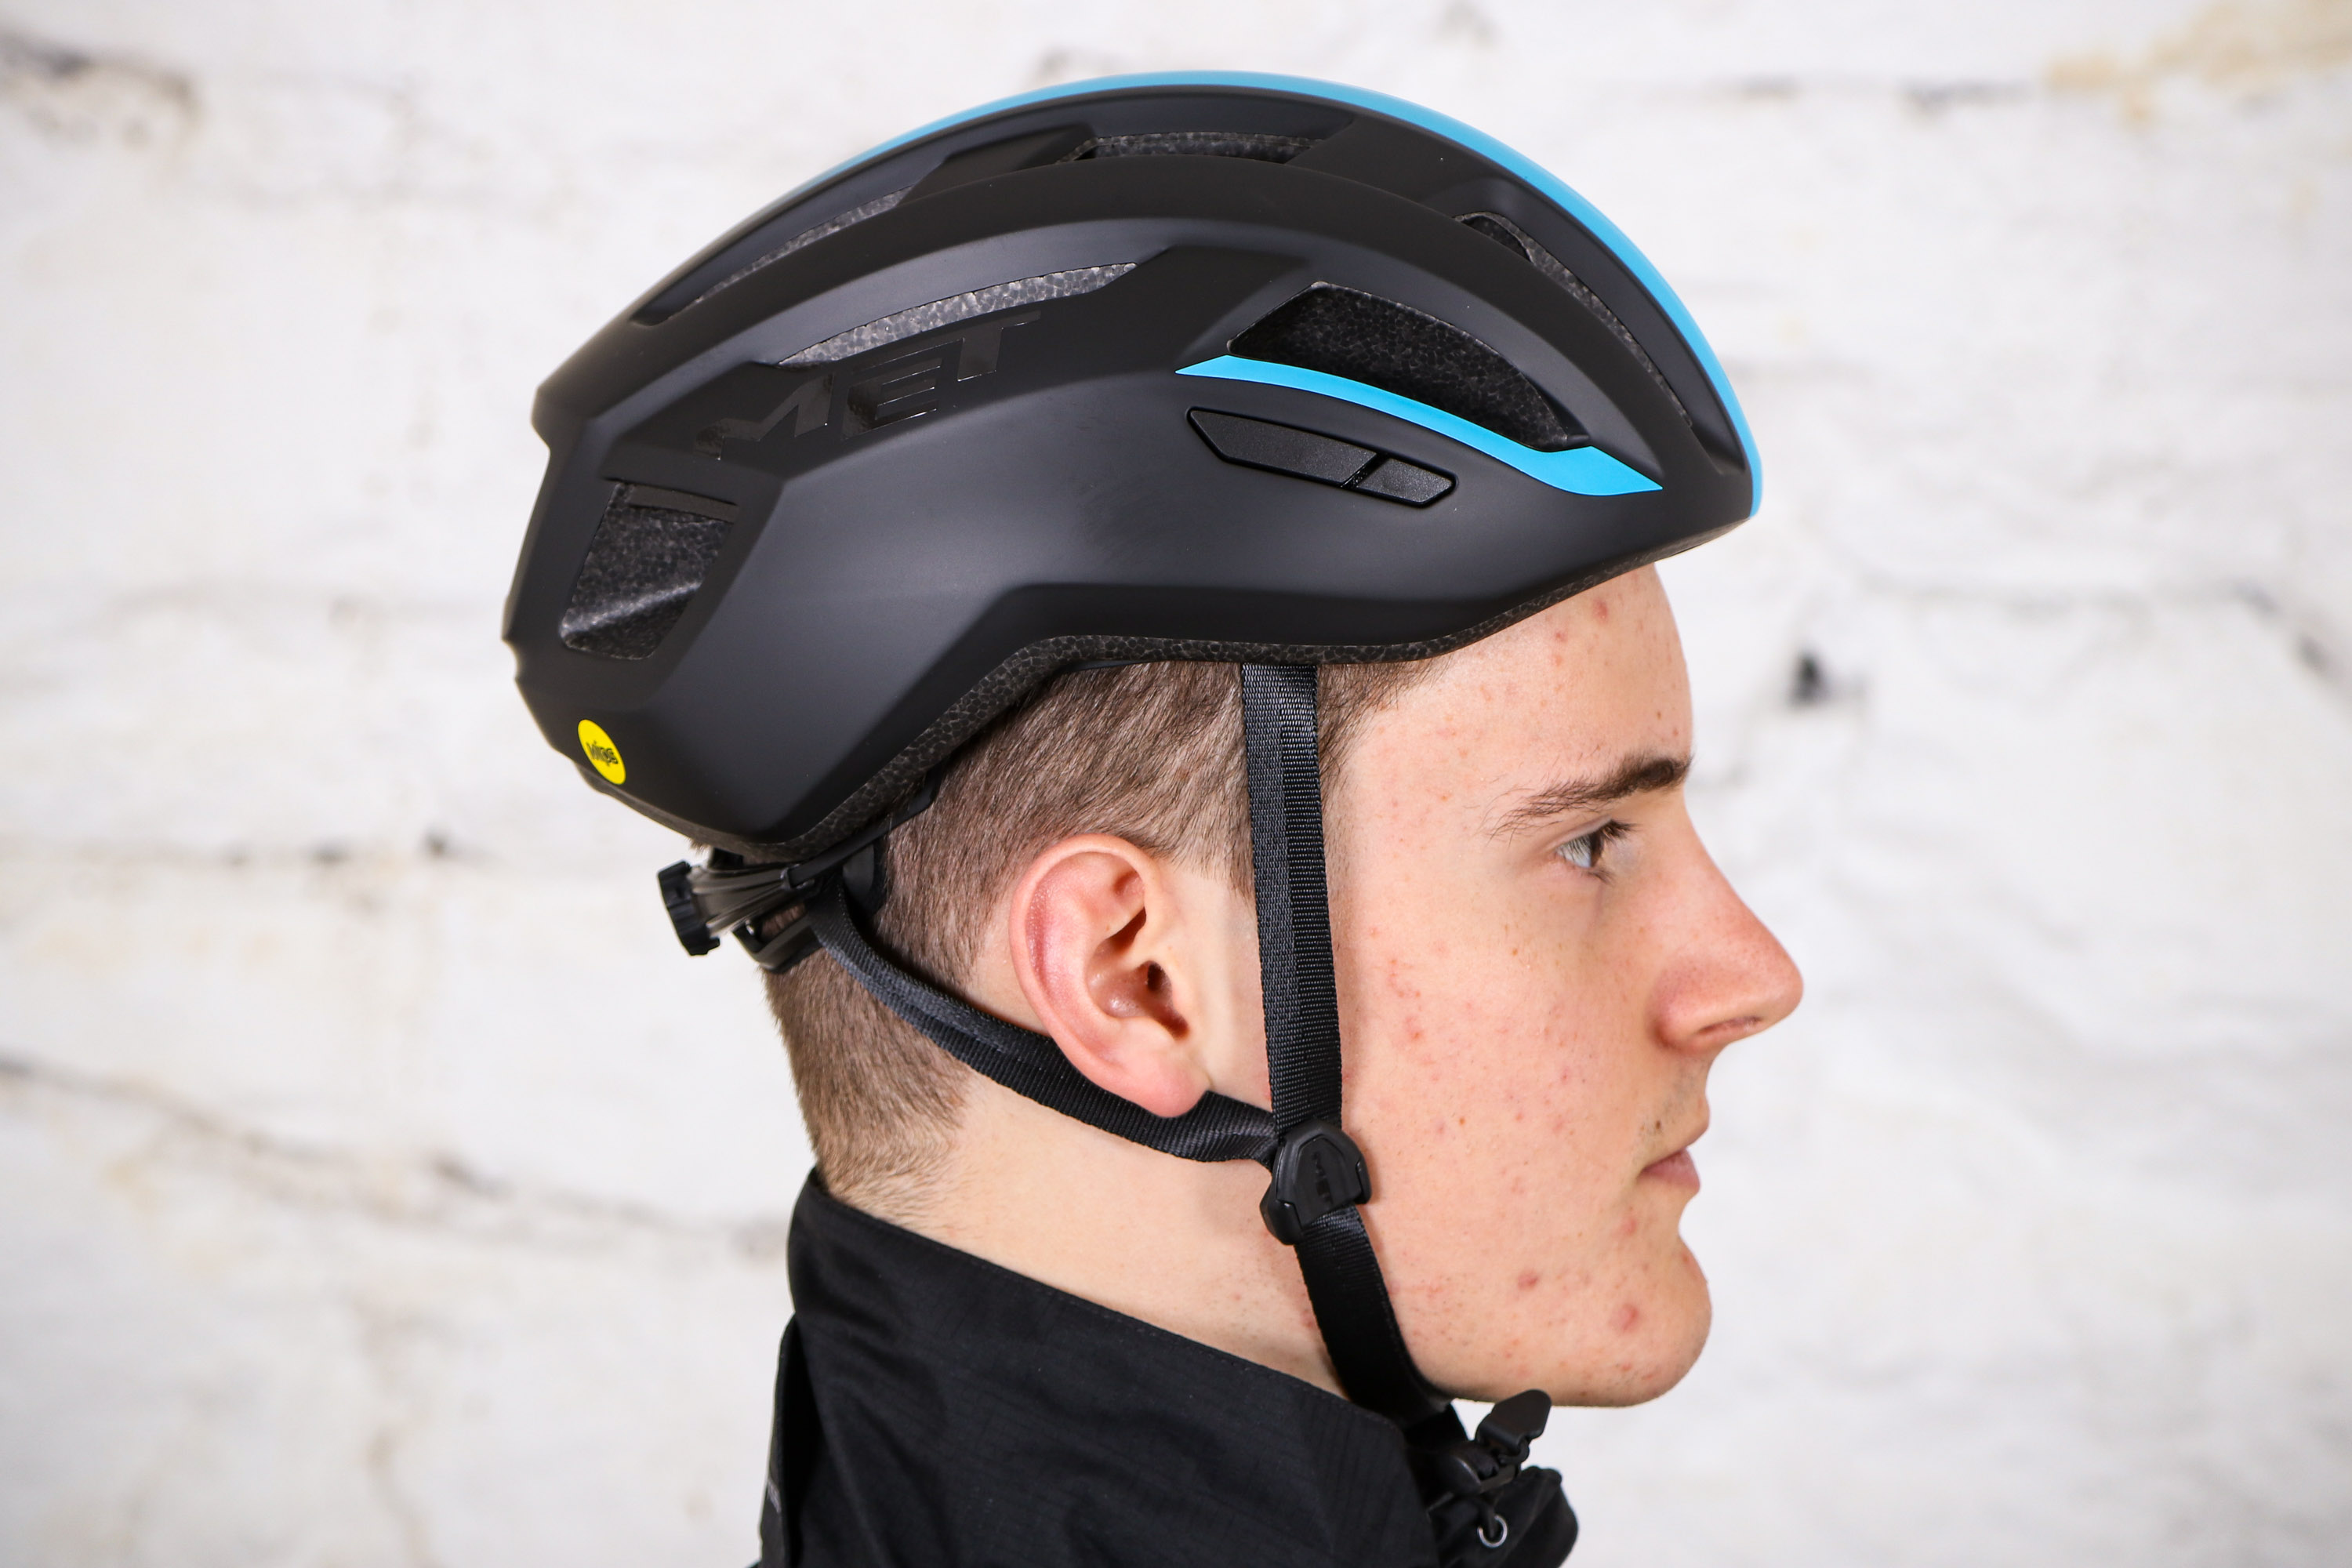 Details about   US Mountain Bicycle Helmet MTB Road Cycling Bike Sports Safety Helmet Unisex Hot 